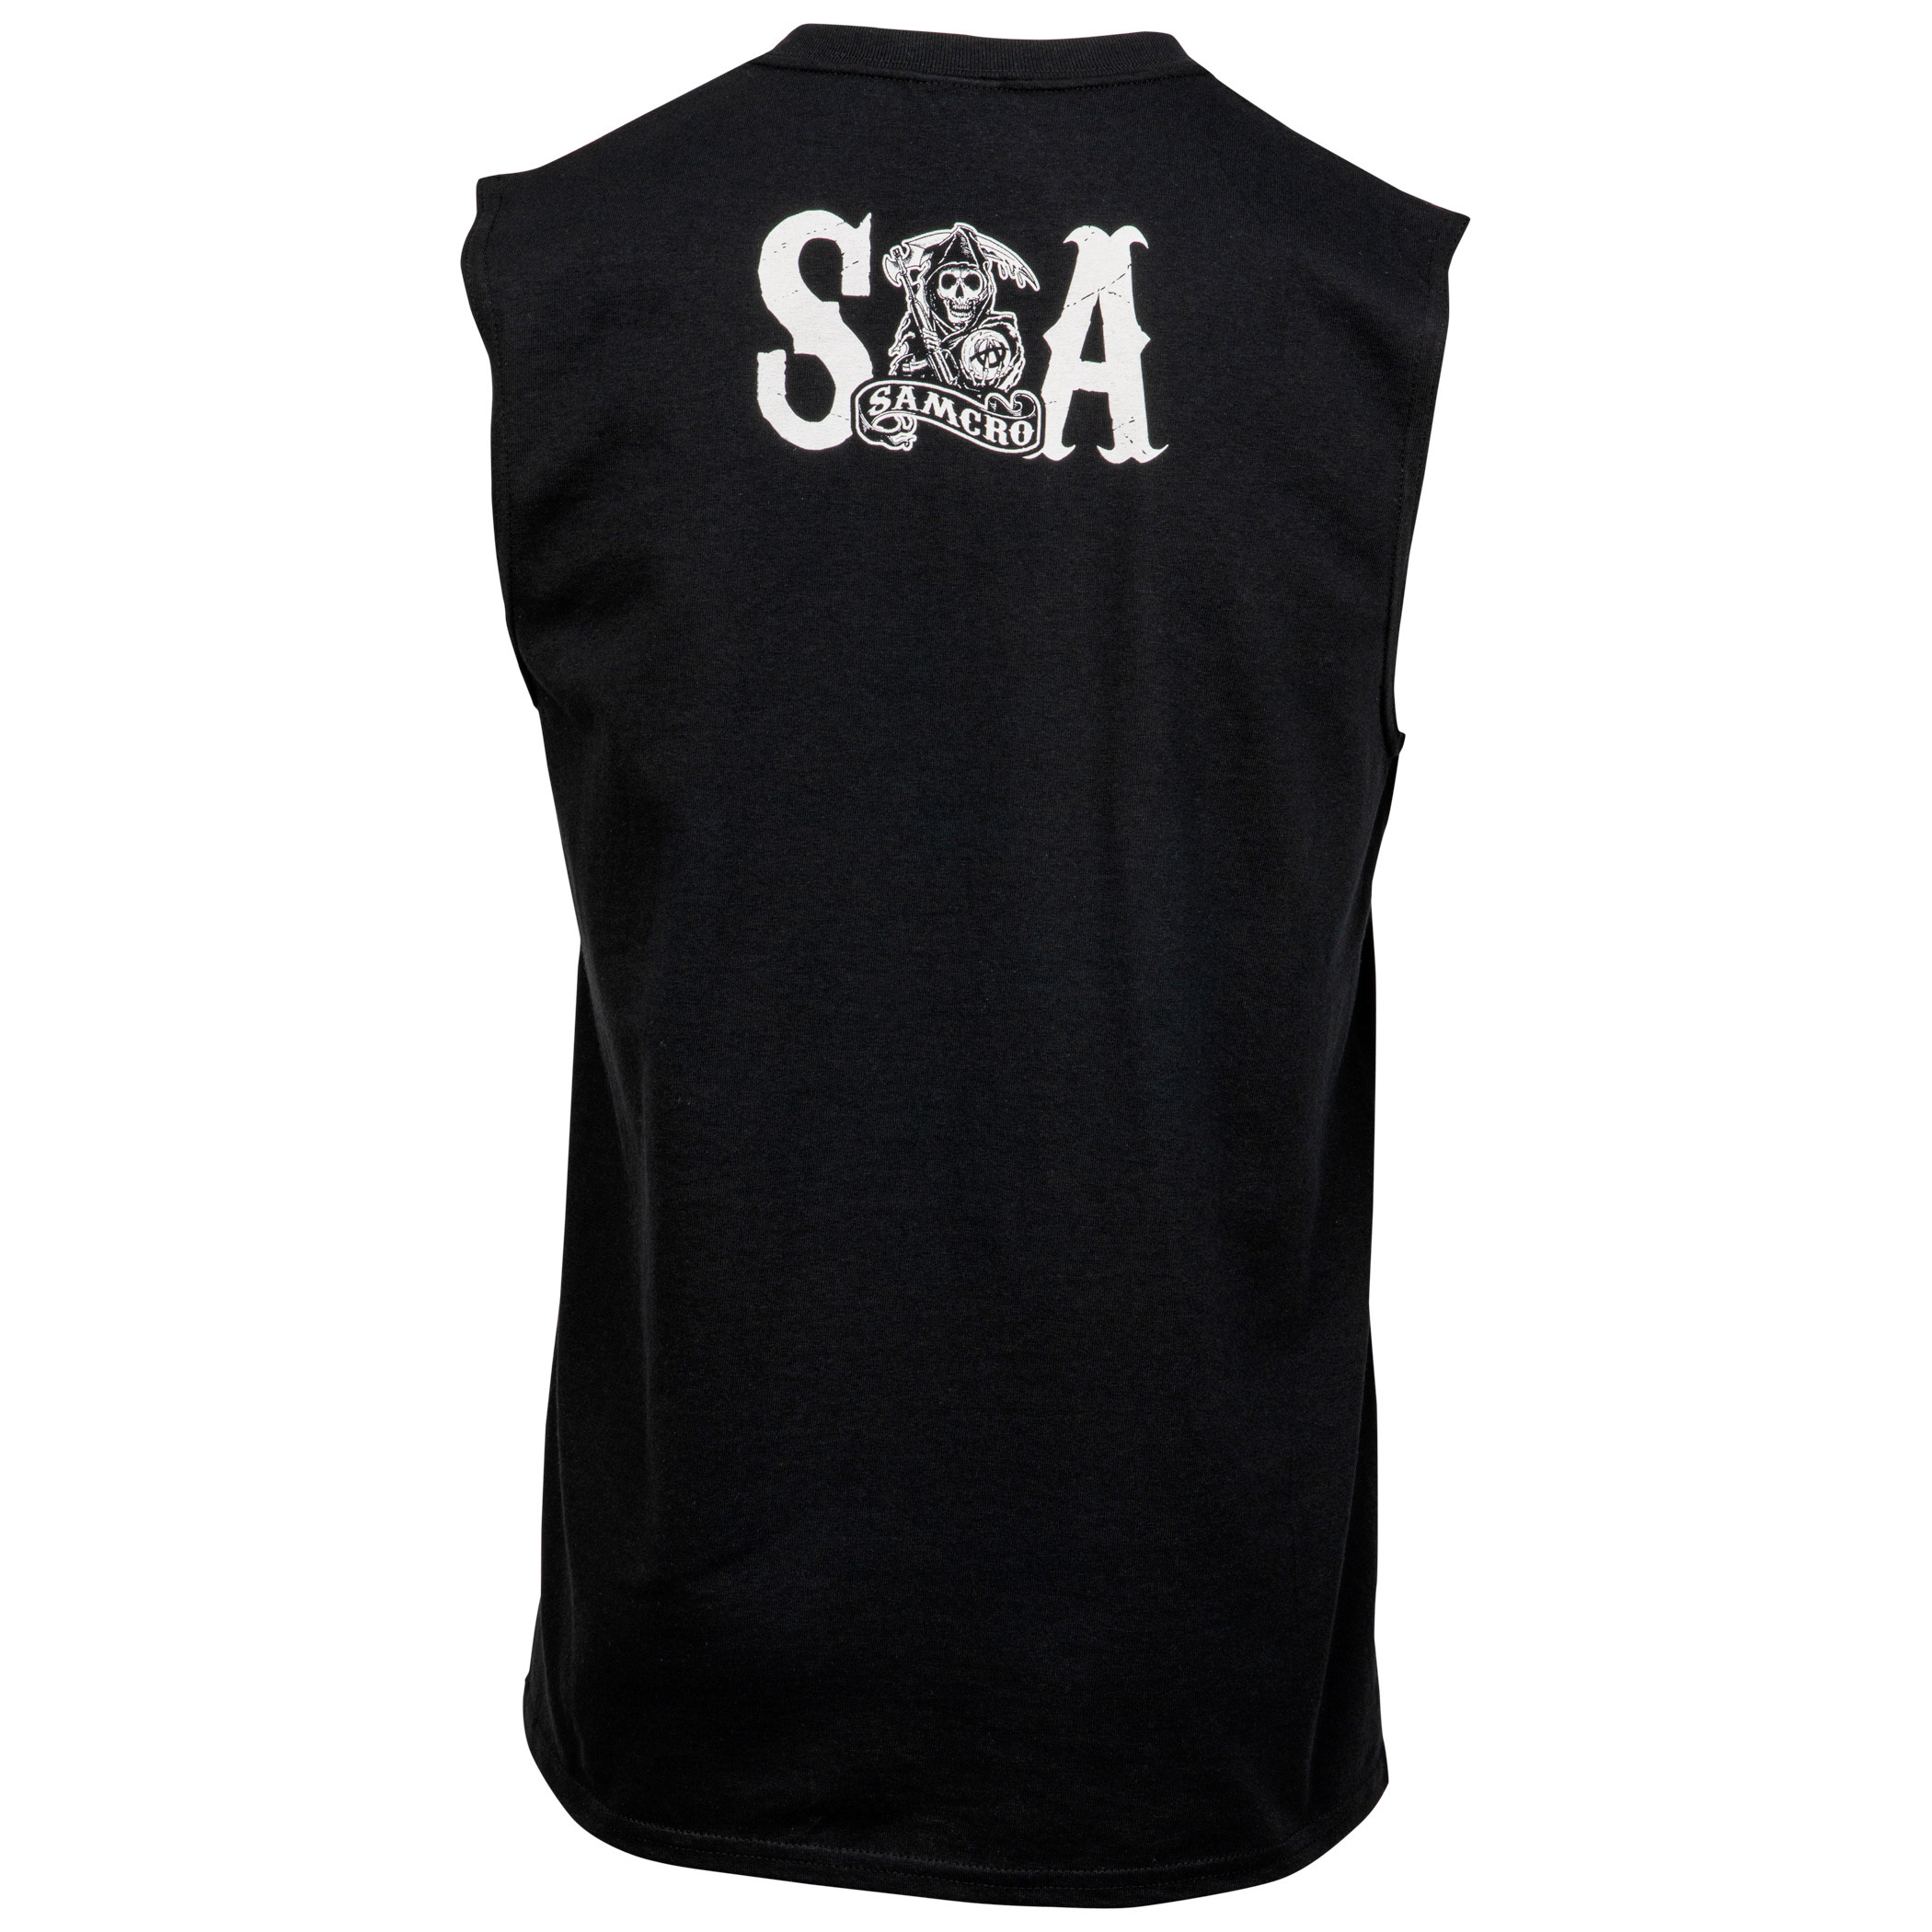 Sons of Anarchy Crossed Weapons Logo and Back Print Sleeveless T-Shirt